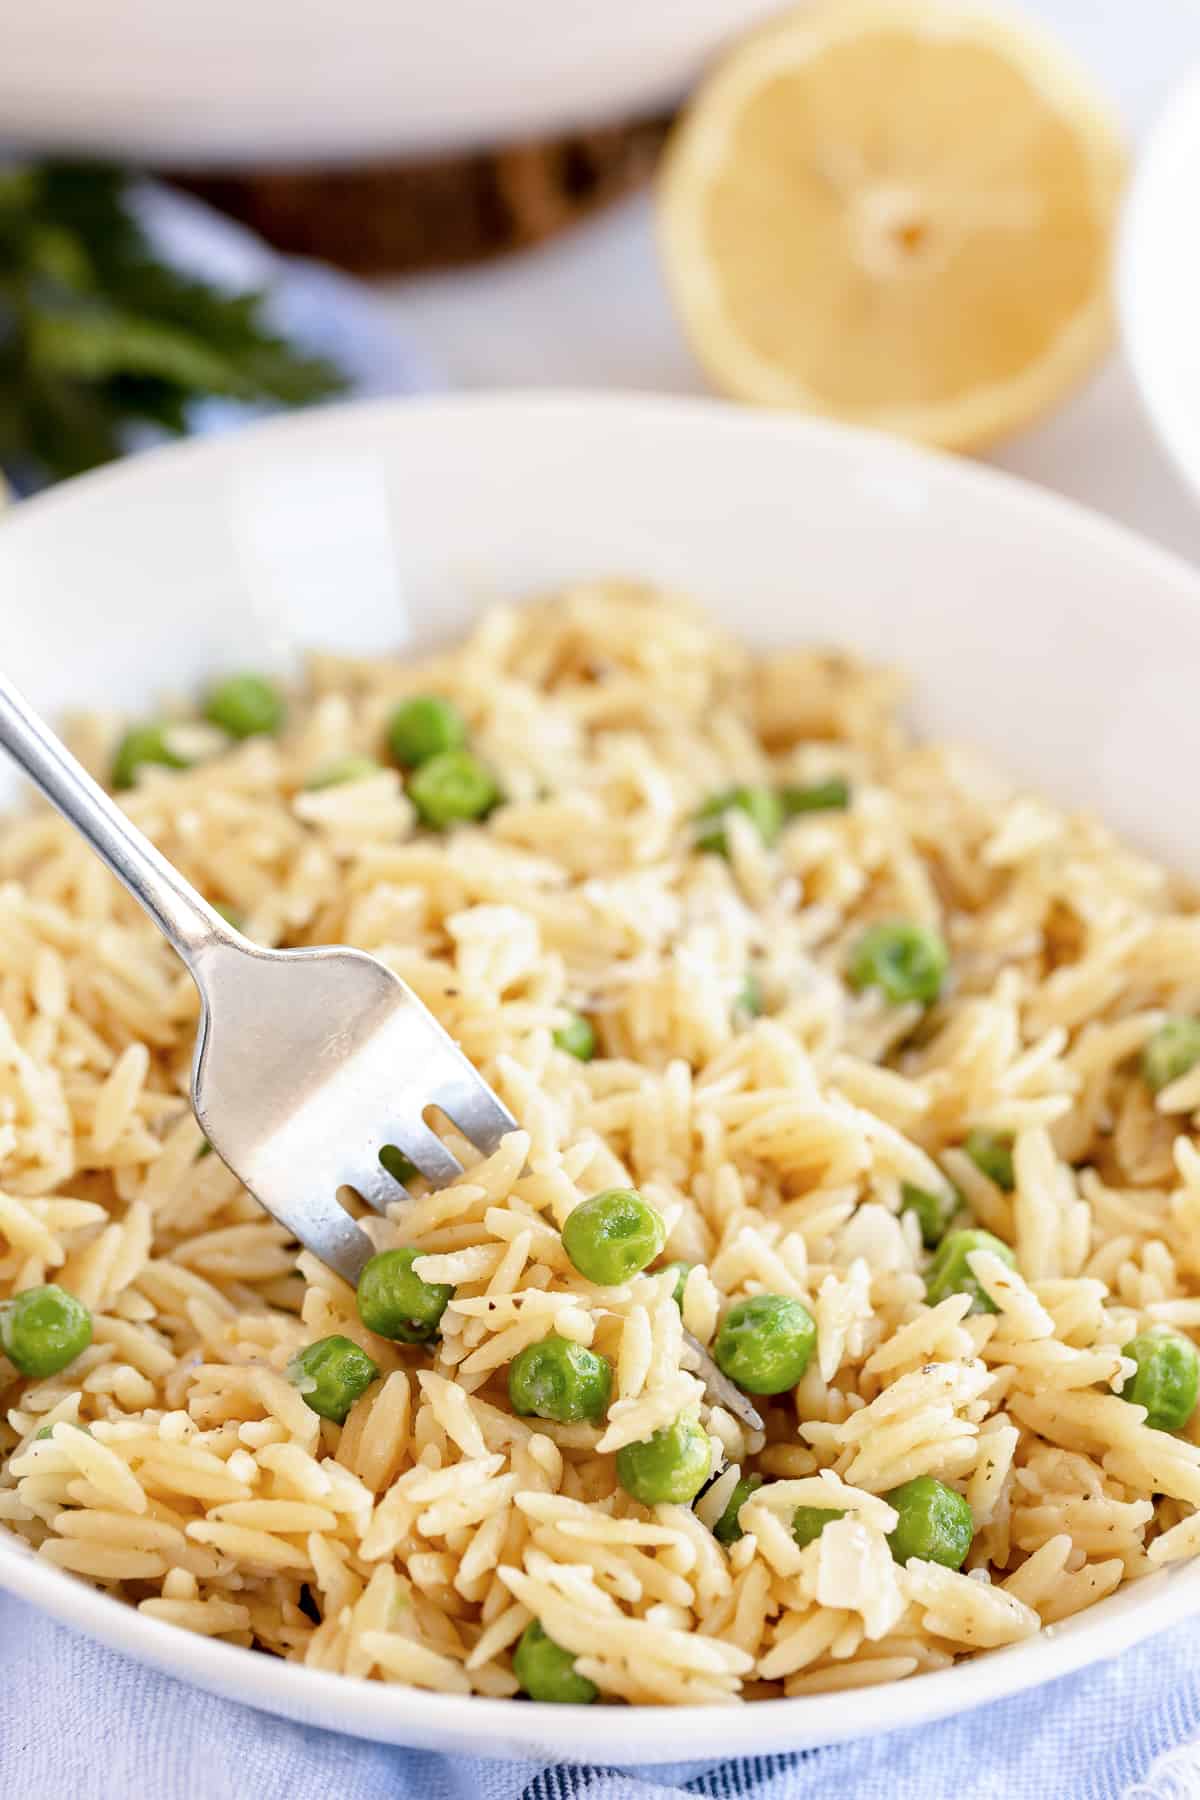 A fork in a bowl of orzo and peas.